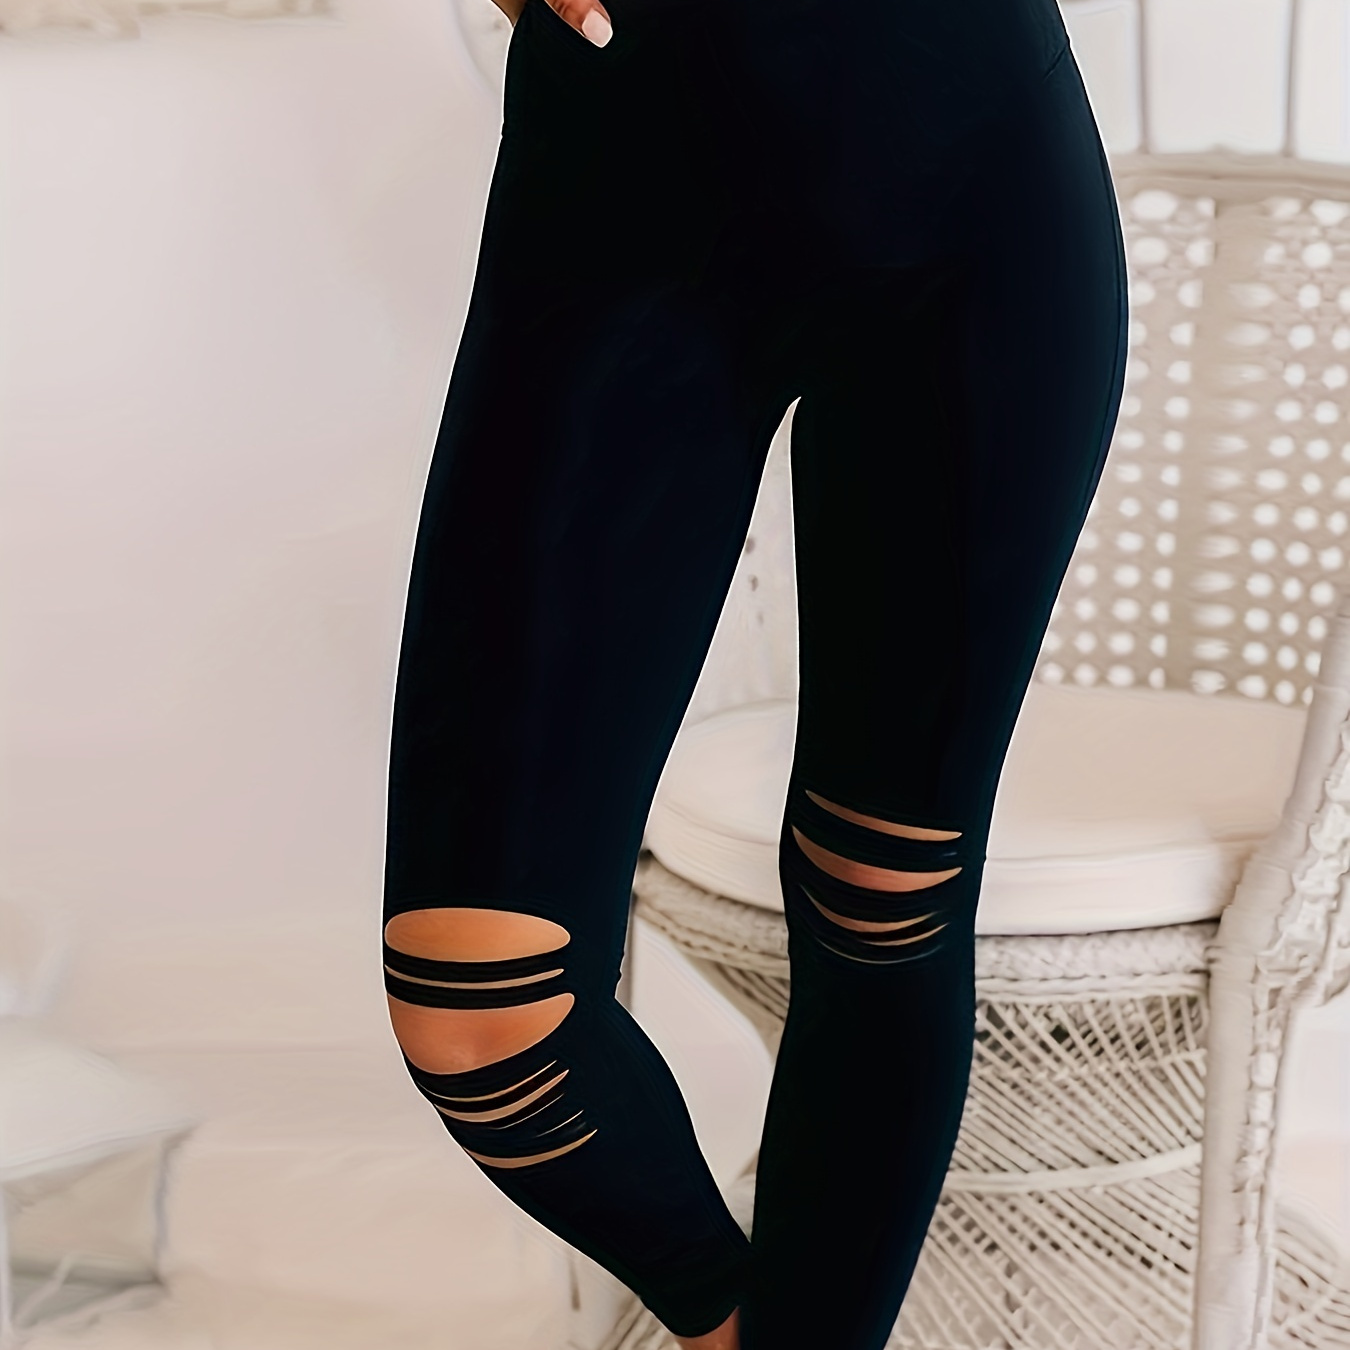 

Women's High-waisted Ripped Yoga Leggings, Stretchy Casual Sportswear, Black Elastic Gym Tights, Breathable Athletic Pants For Fall & Winter